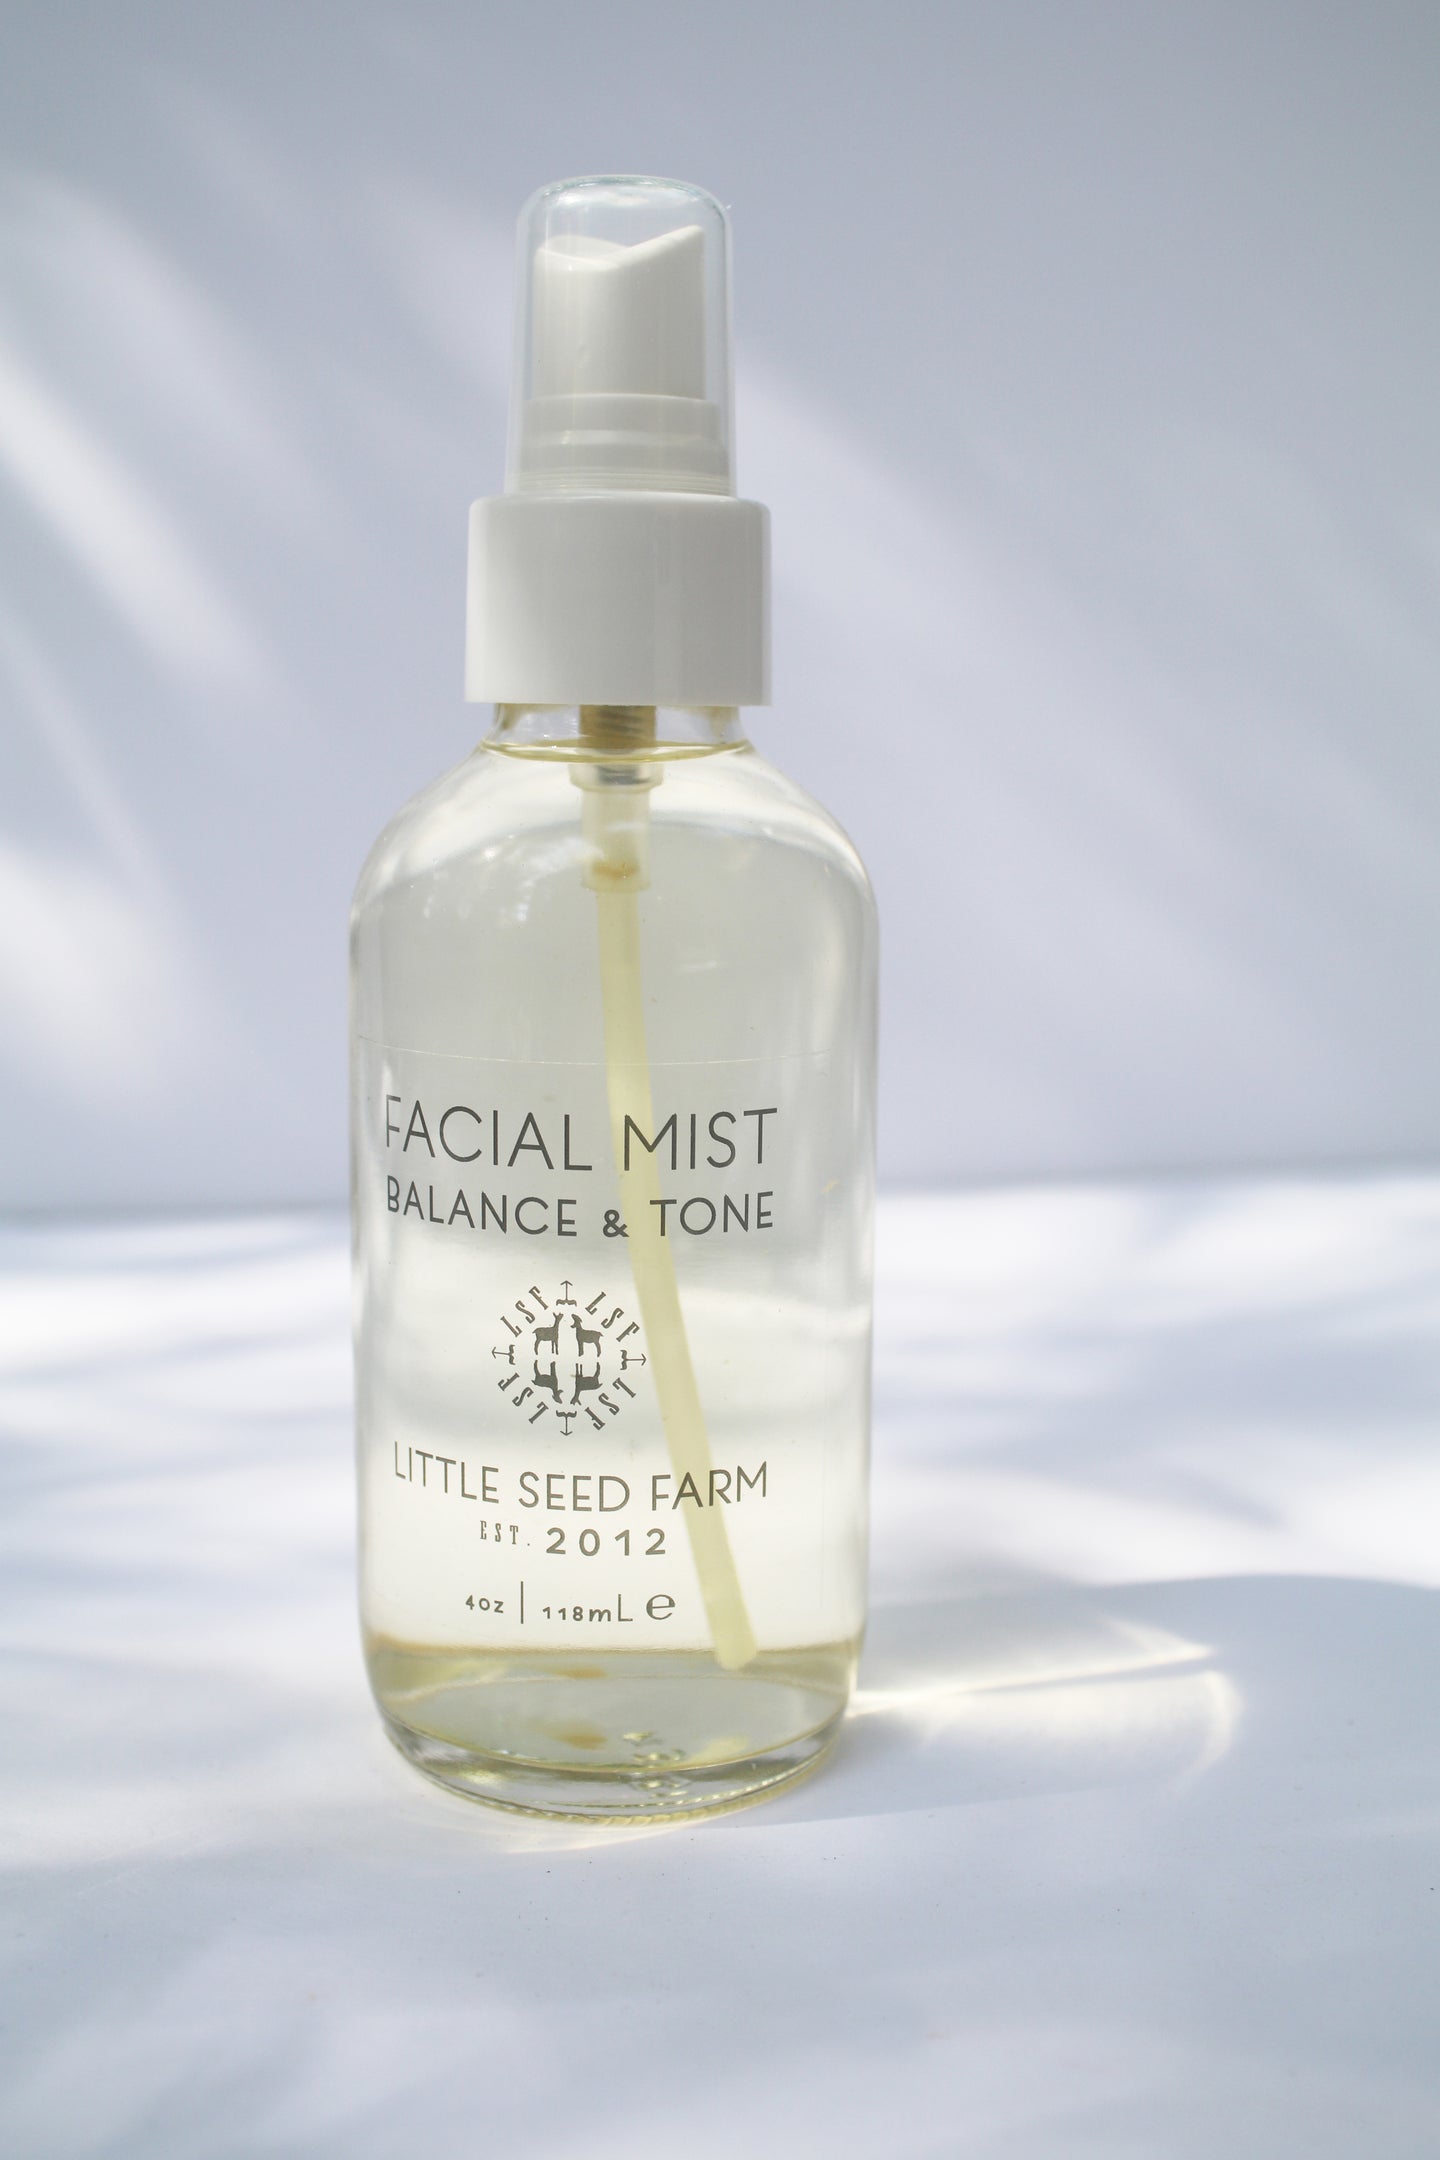 a bottle of facial mist by Little Seed Farm with a spray nozzle